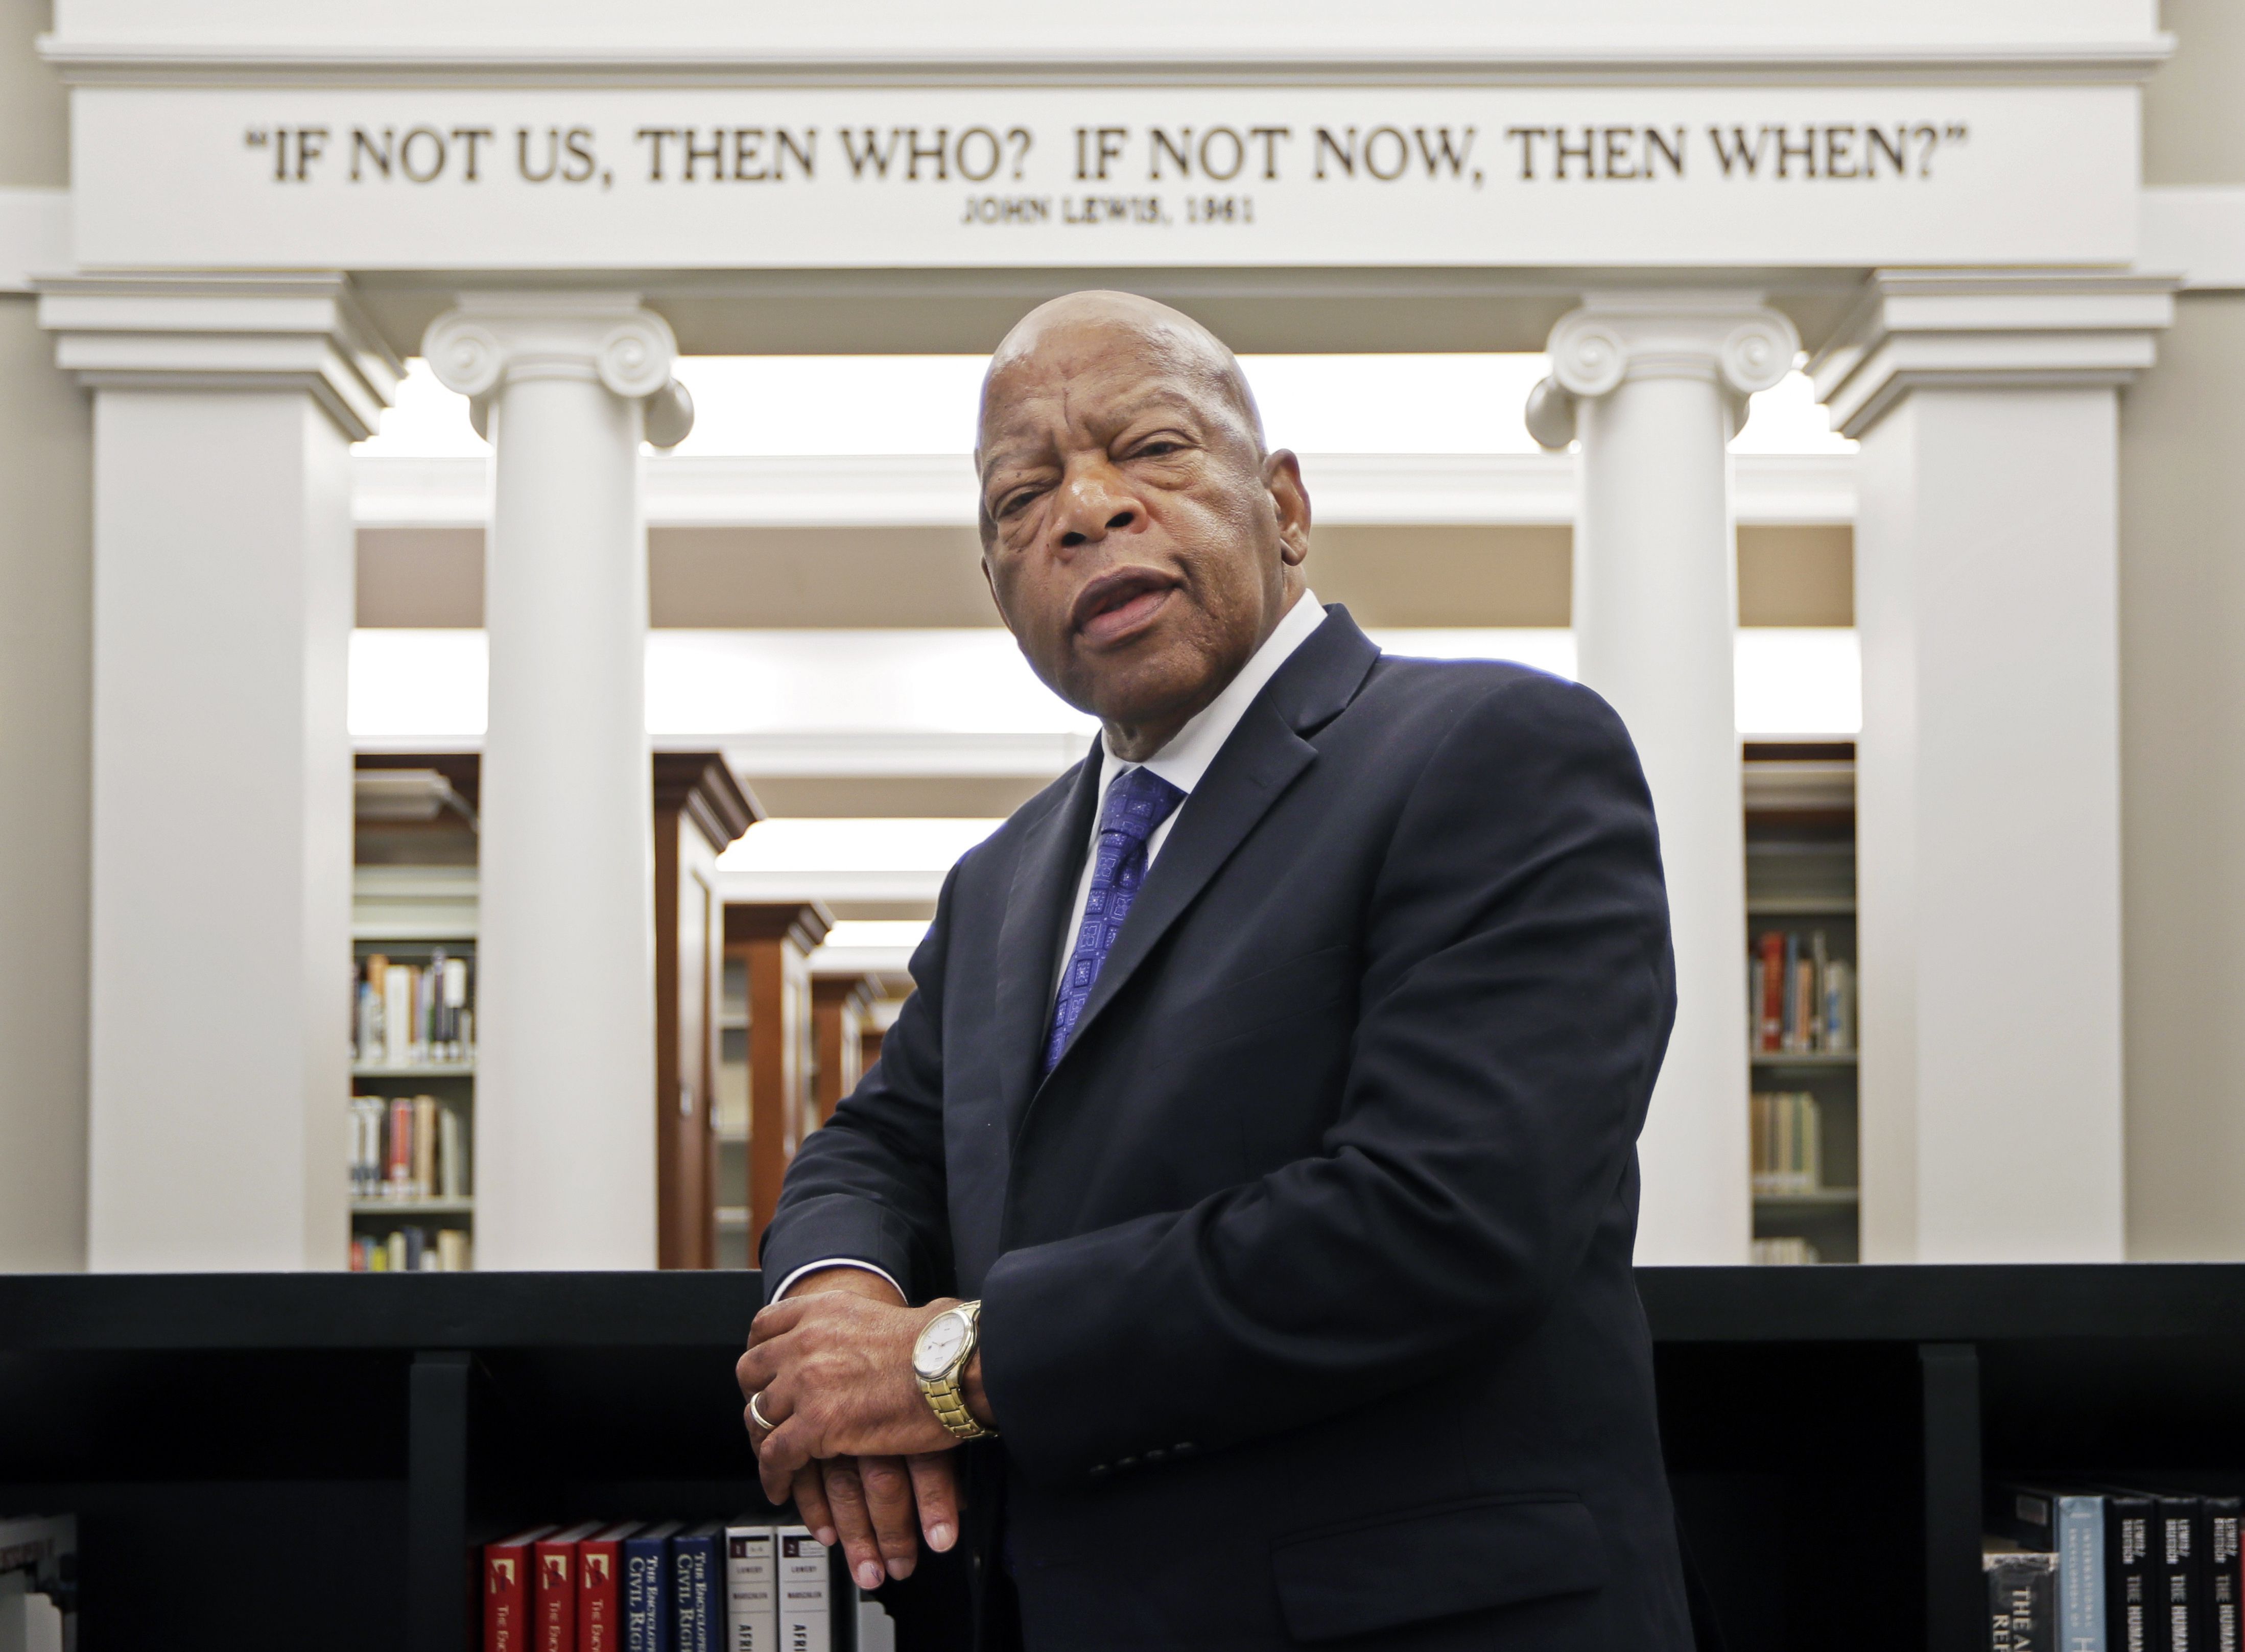 22 Inspiring John Lewis Quotes — Protest Quotes and Movement Quotes